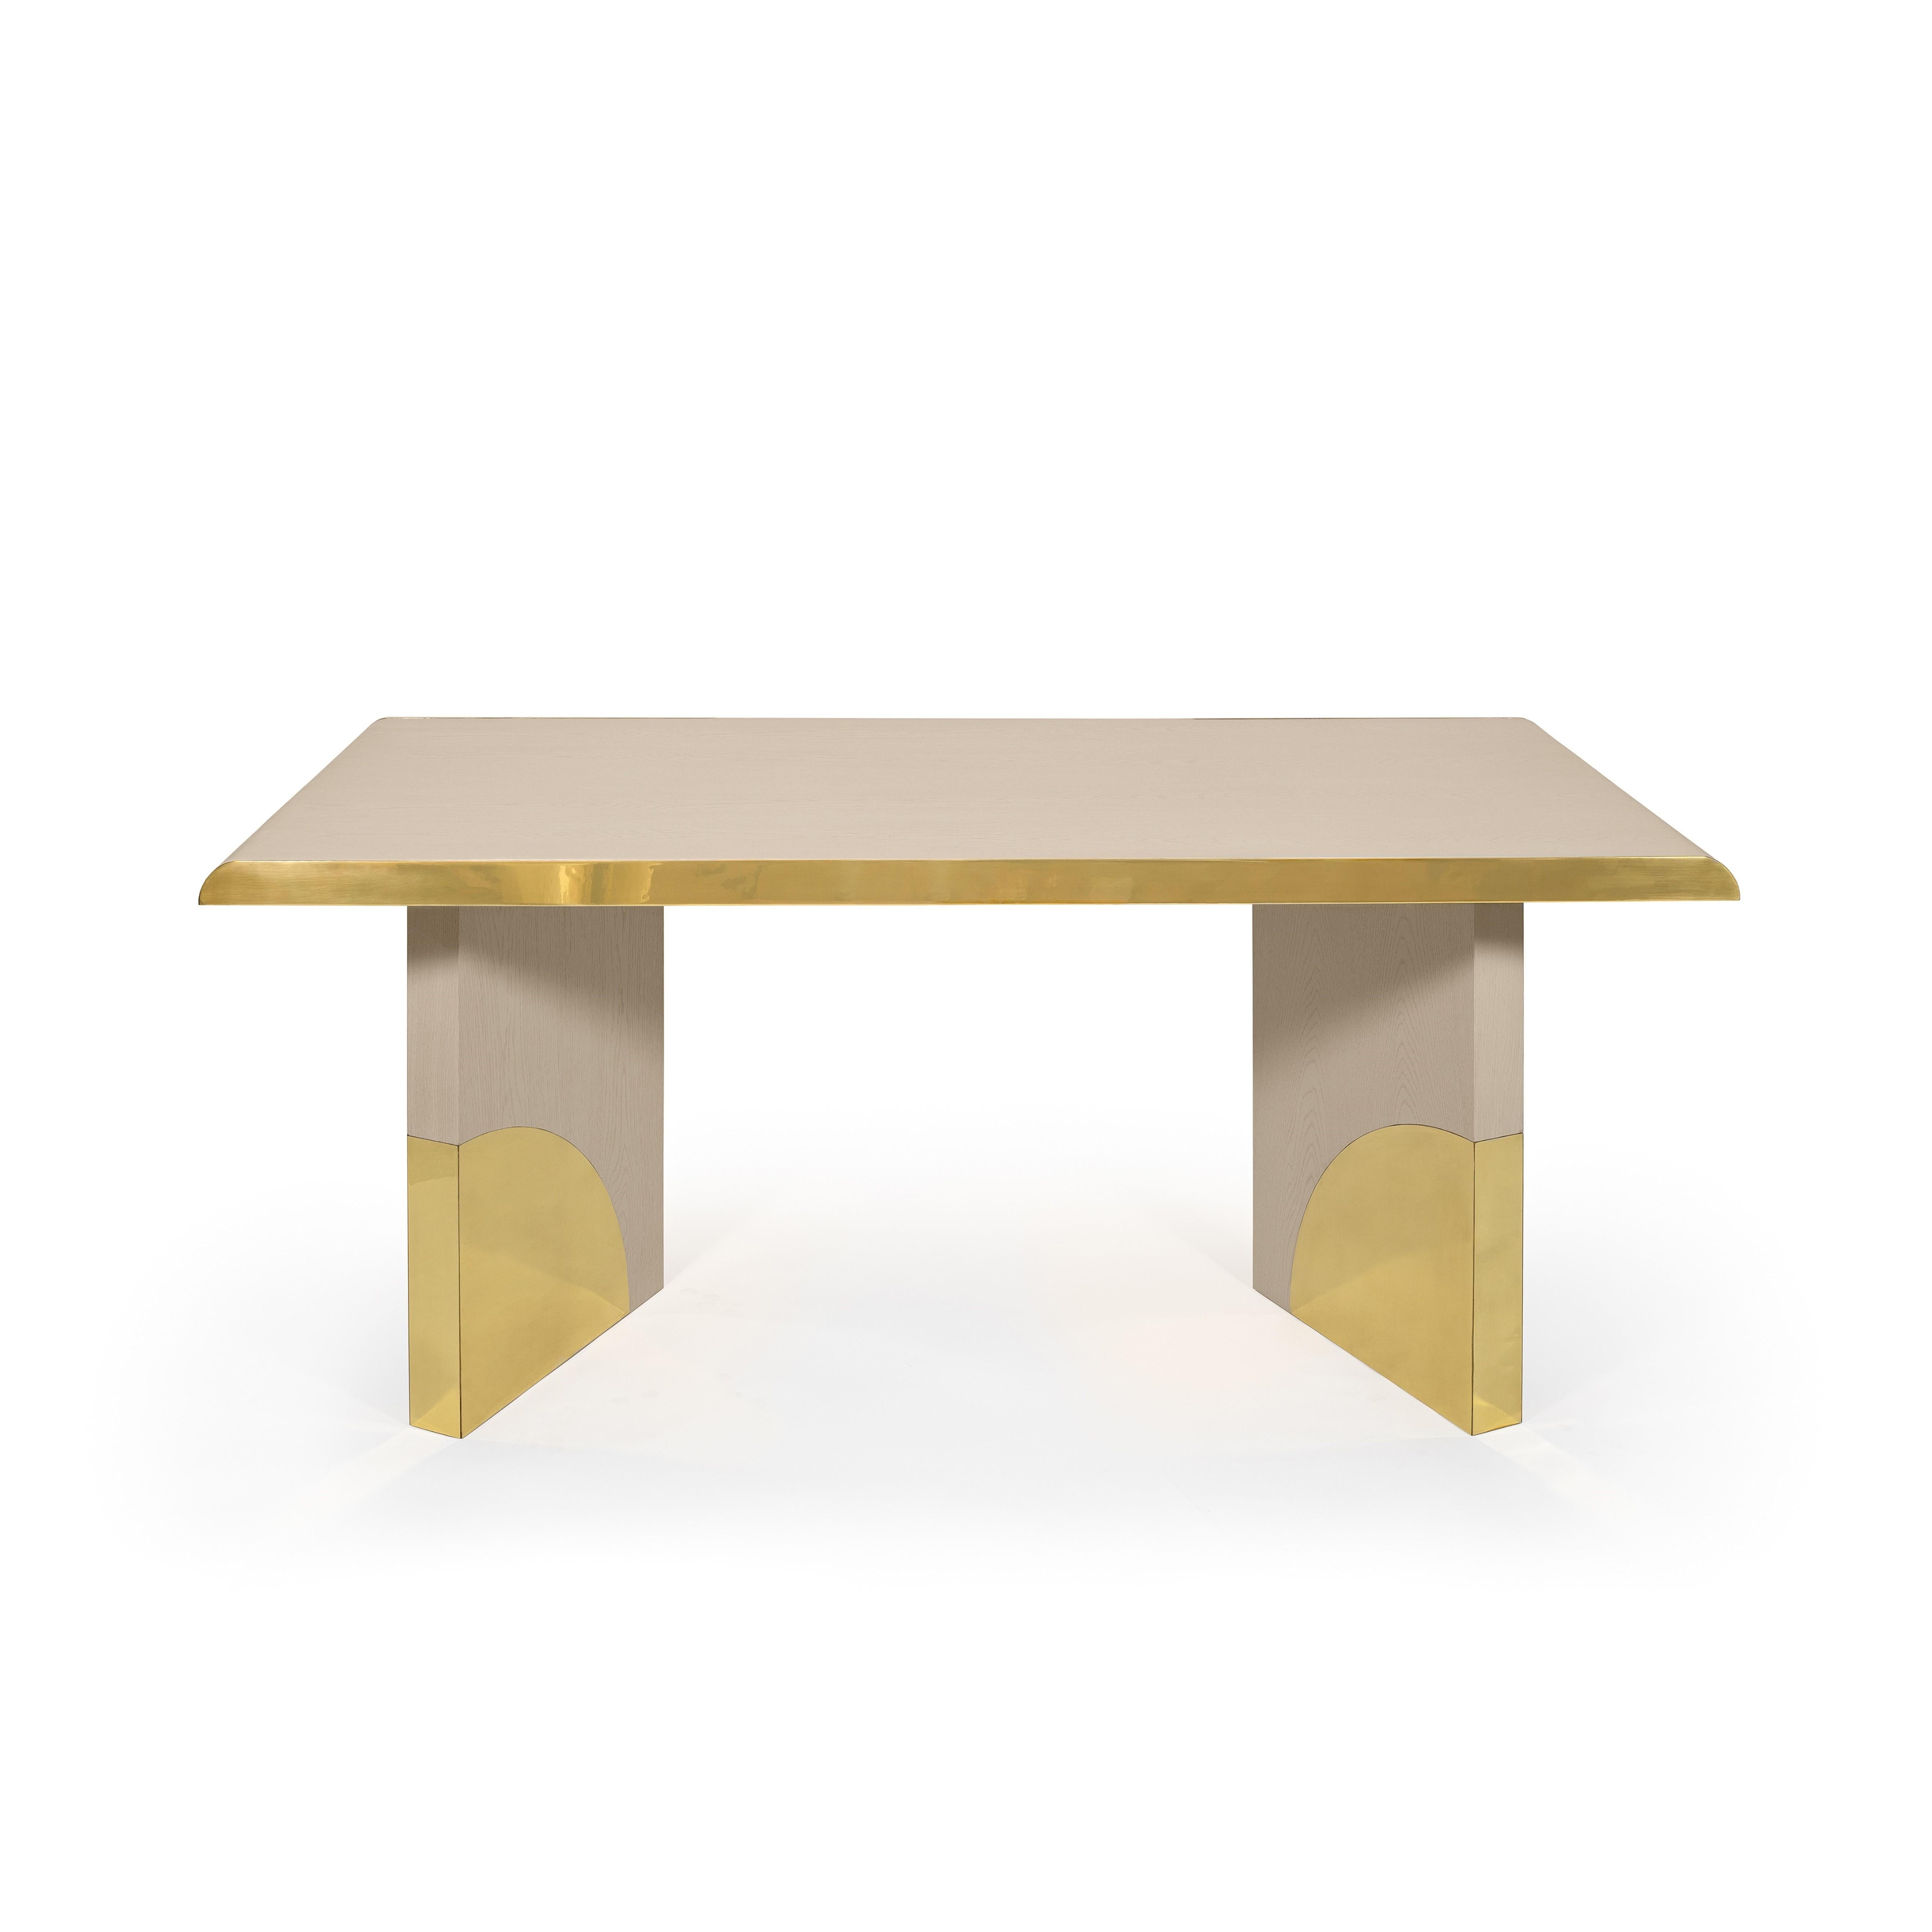 The utopia desk is designed in the likeness of the architectural scale that suggests a crossing through the structures of a utopian city, organized by the principles of symmetry and ideal forms.

The imposing design combines cream oak and polished